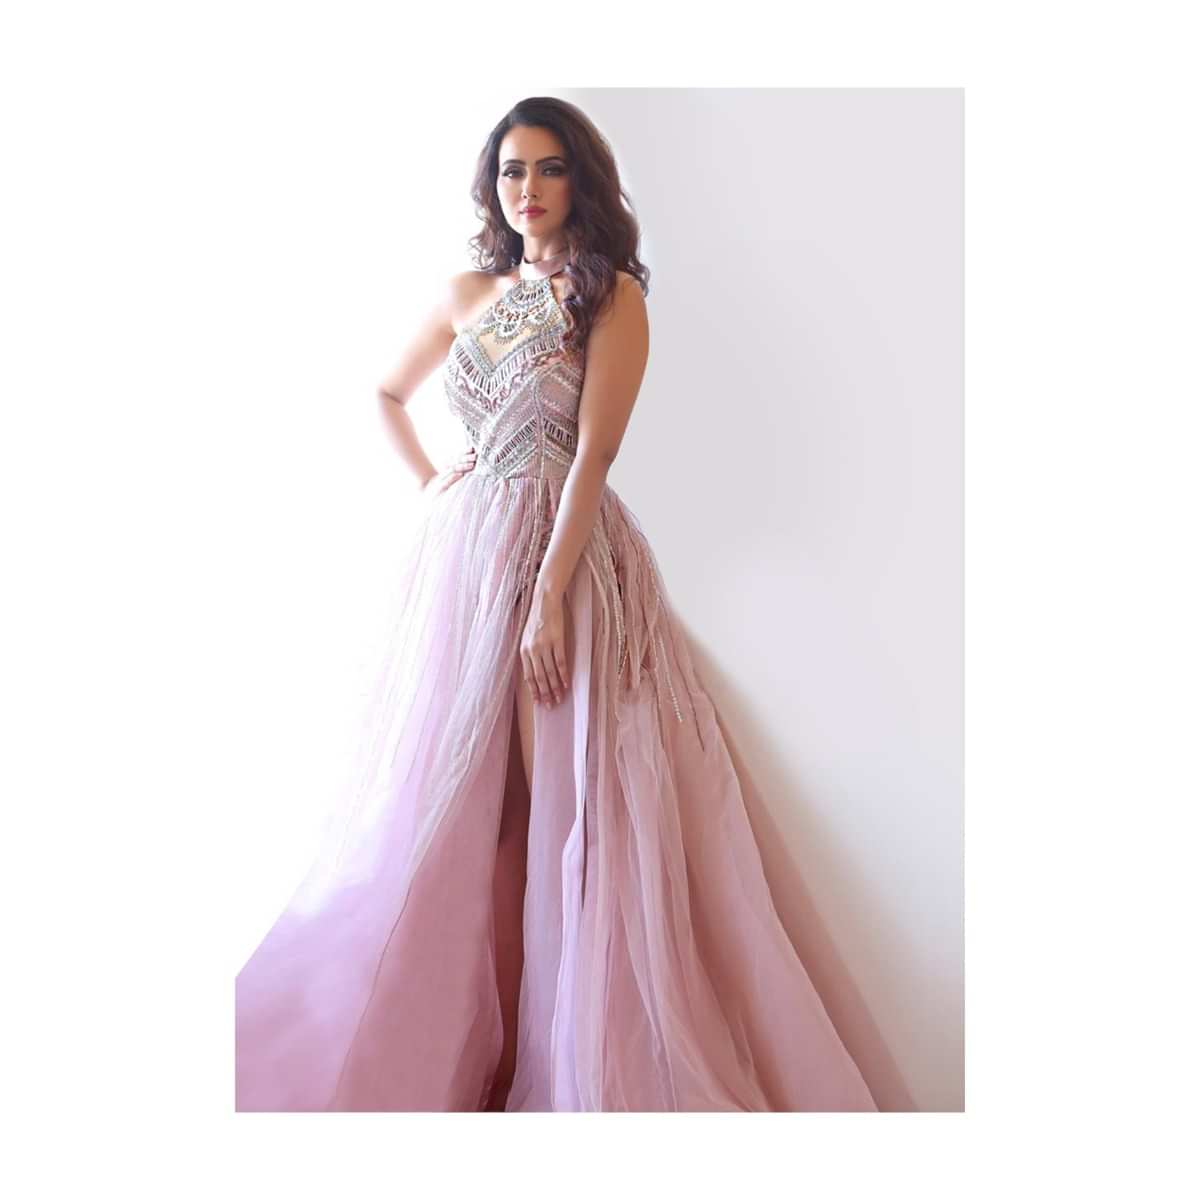 Sana Khan in Kalki mauve pink body suit style embroidered flared net gown with side slit